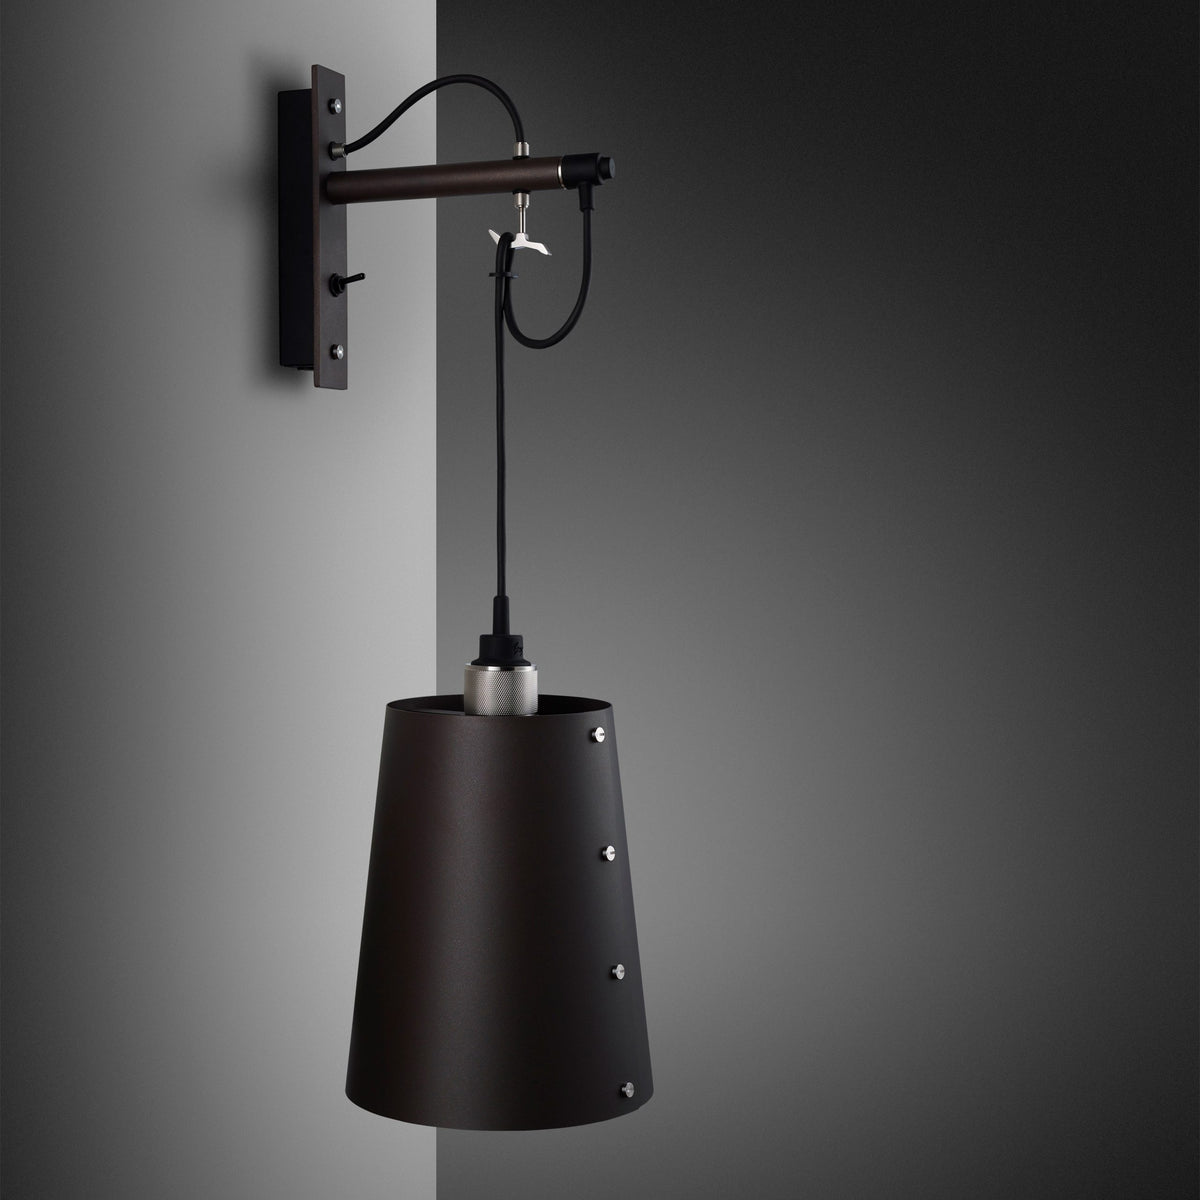 Buster + Punch - NHW-19510 - Hooked Wall Light - Hooked - Graphite / Steel